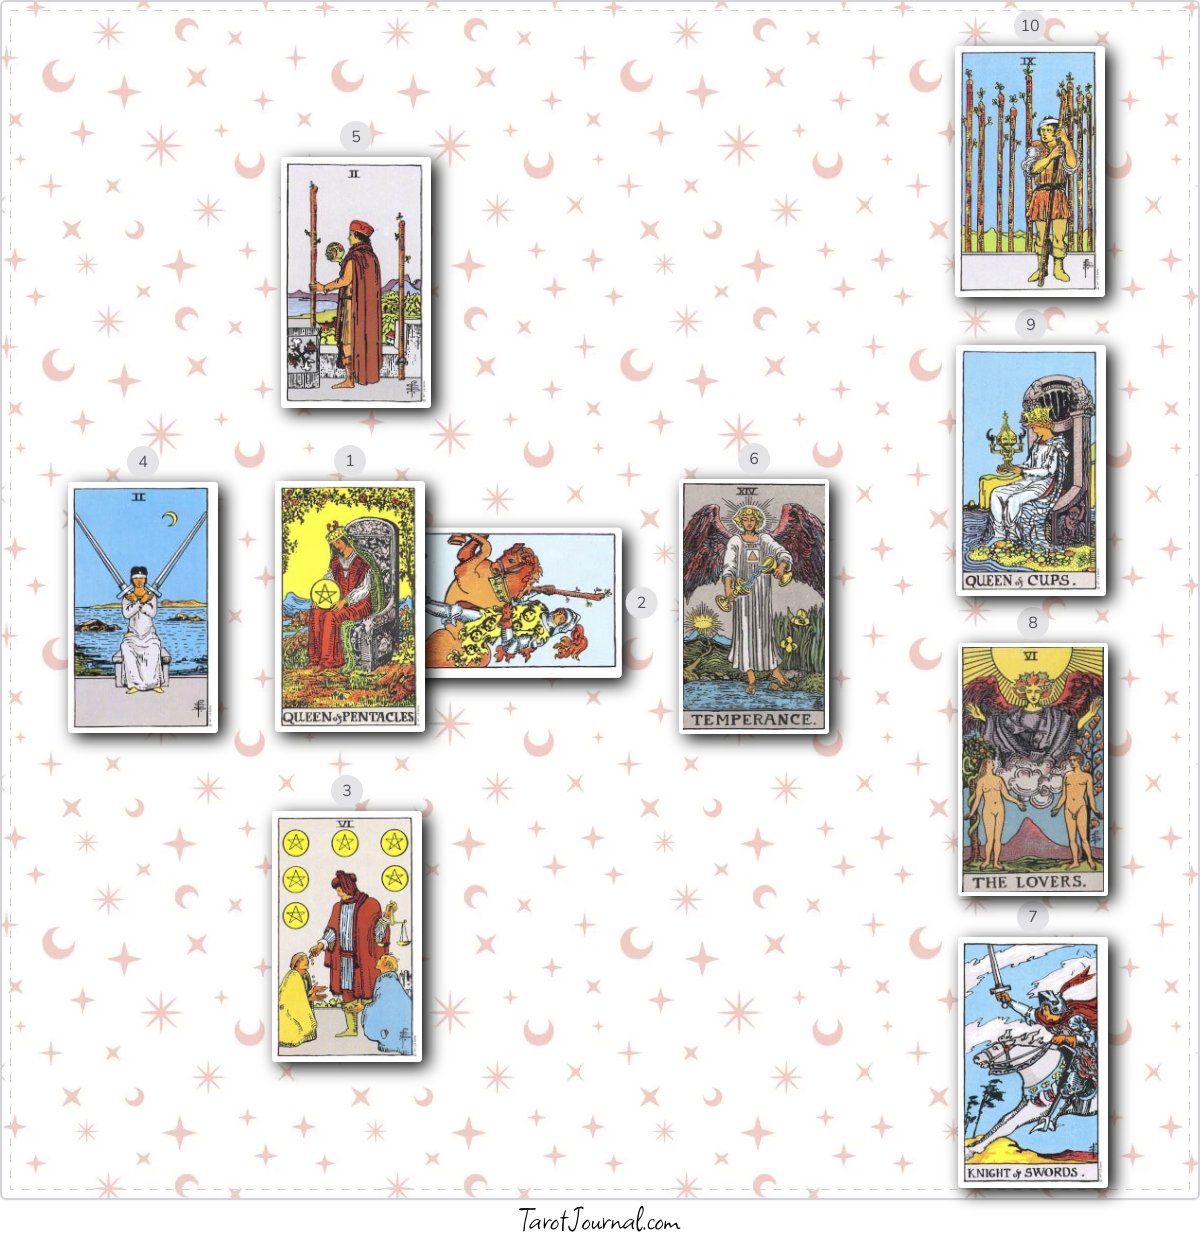 What Should I do About my Career? - tarot reading by Jeremy Brower